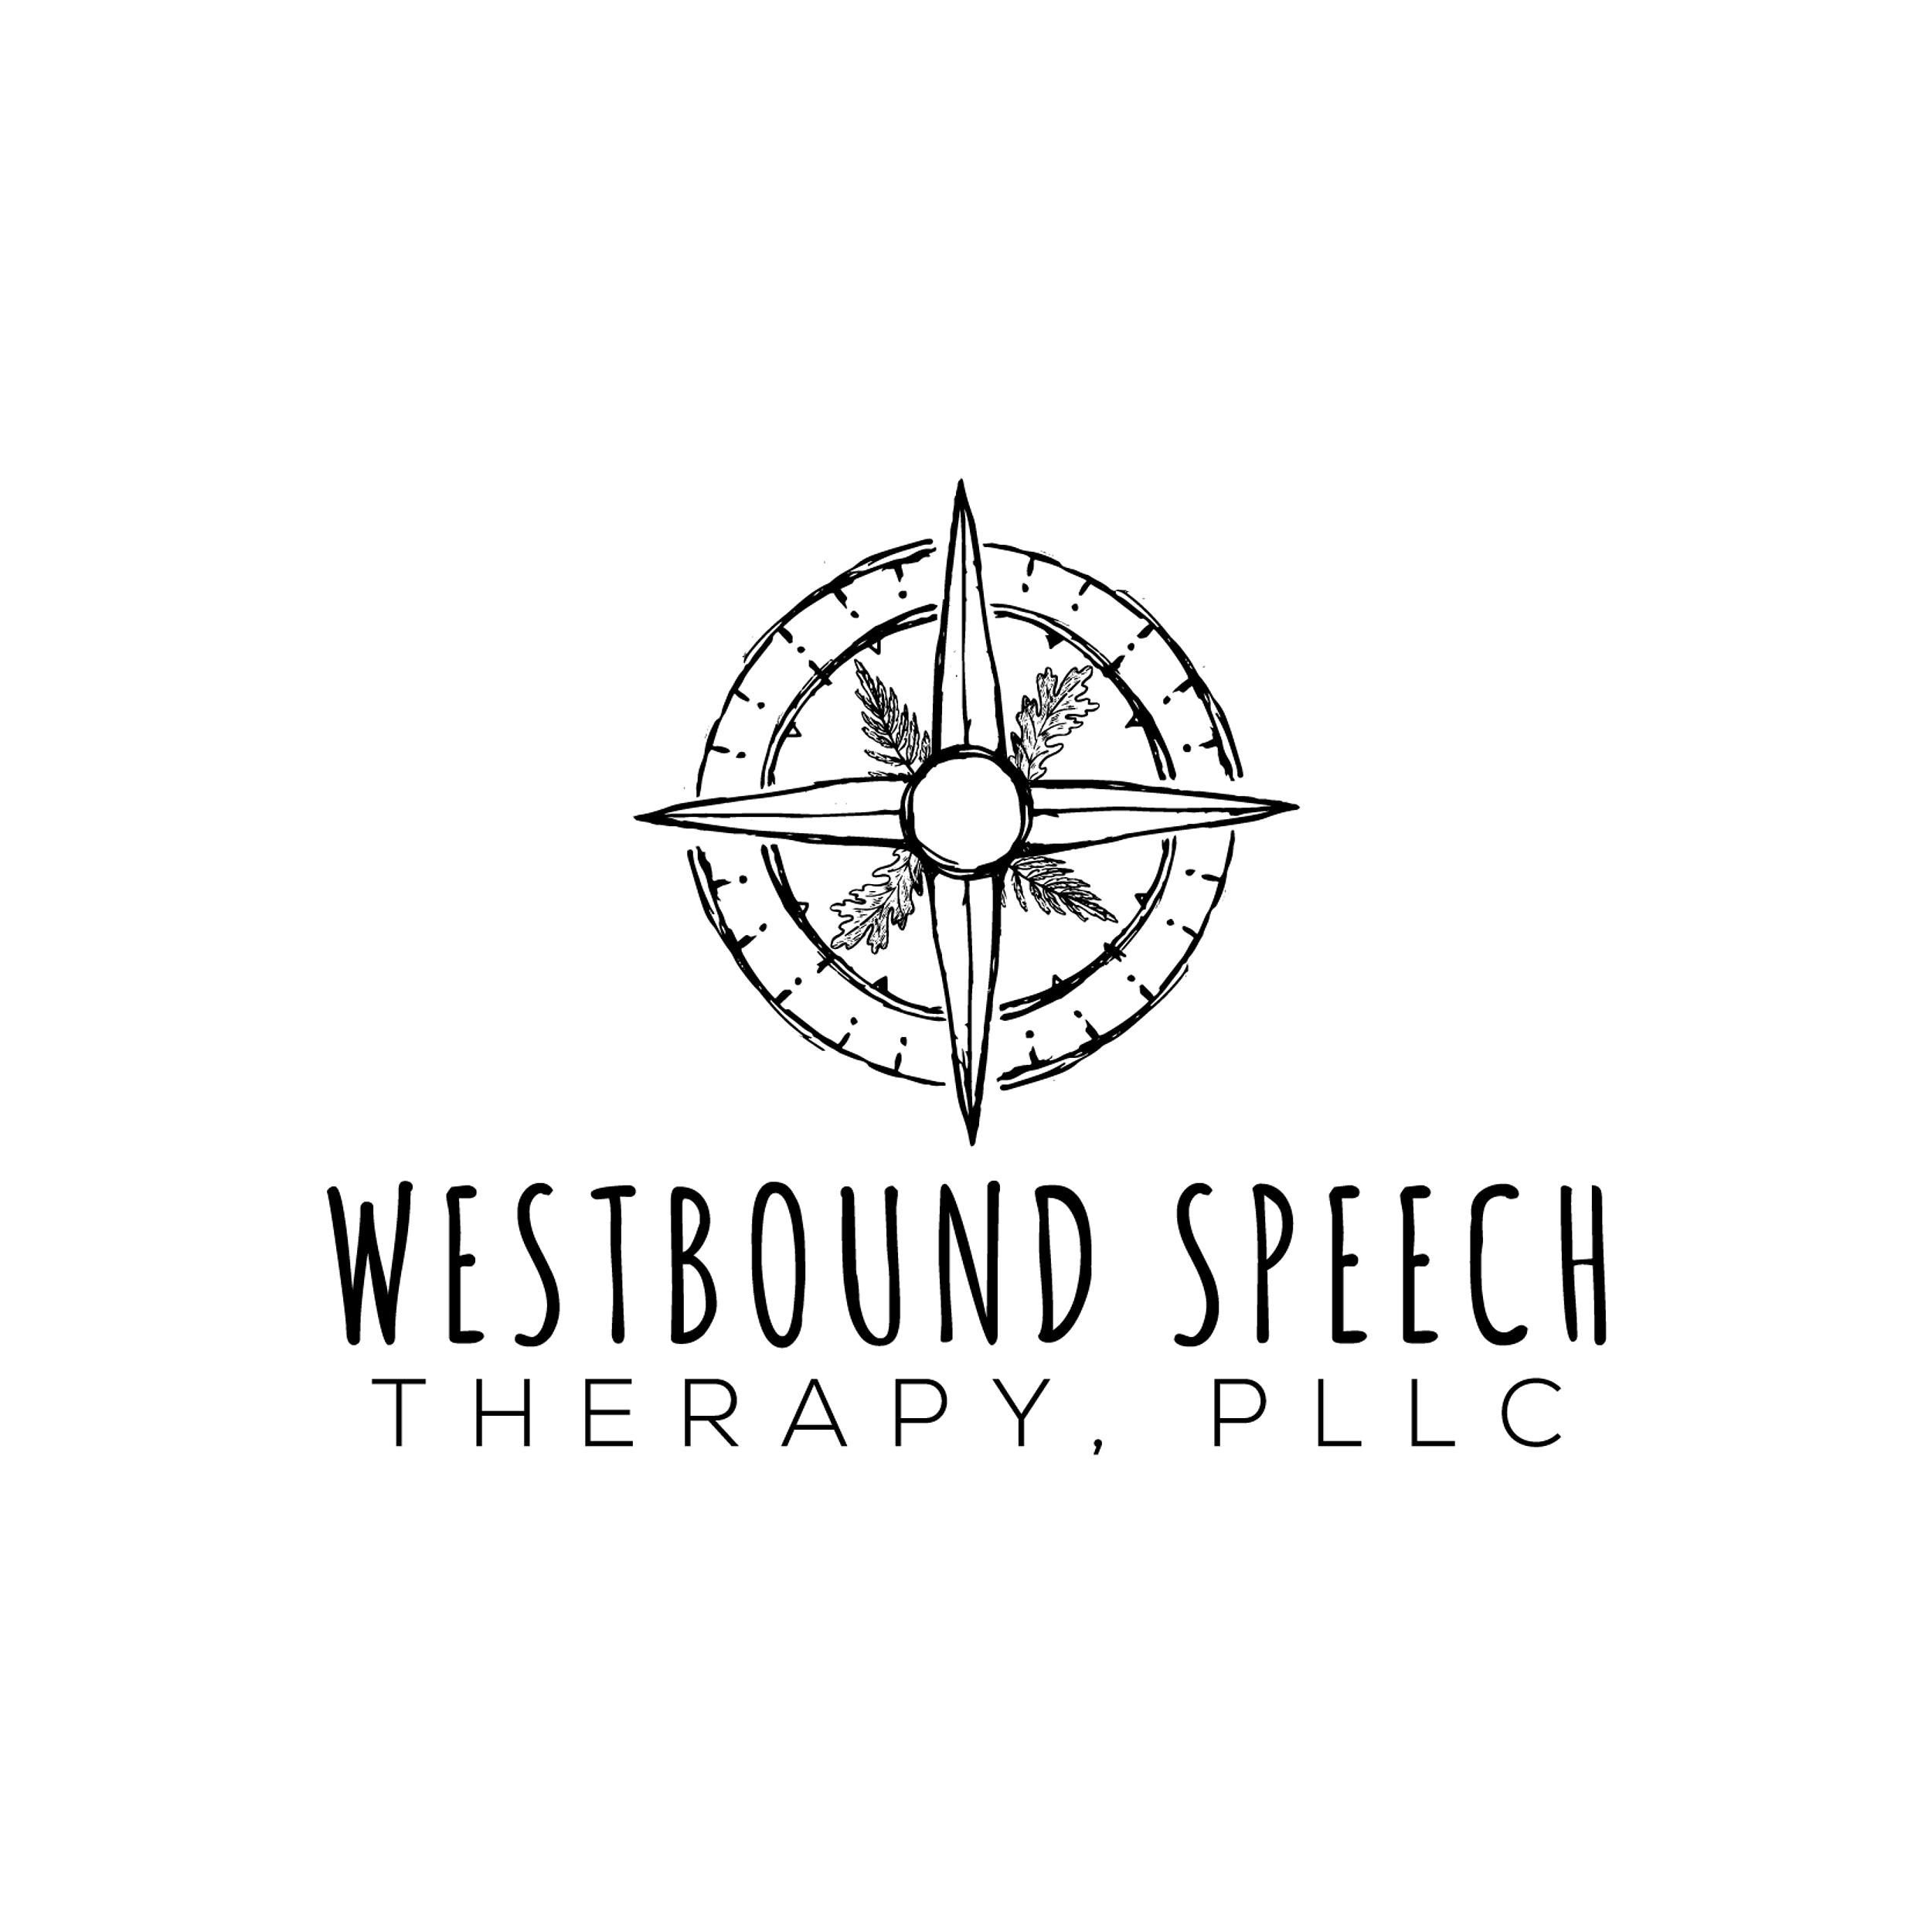 Westbound Speech Therapy